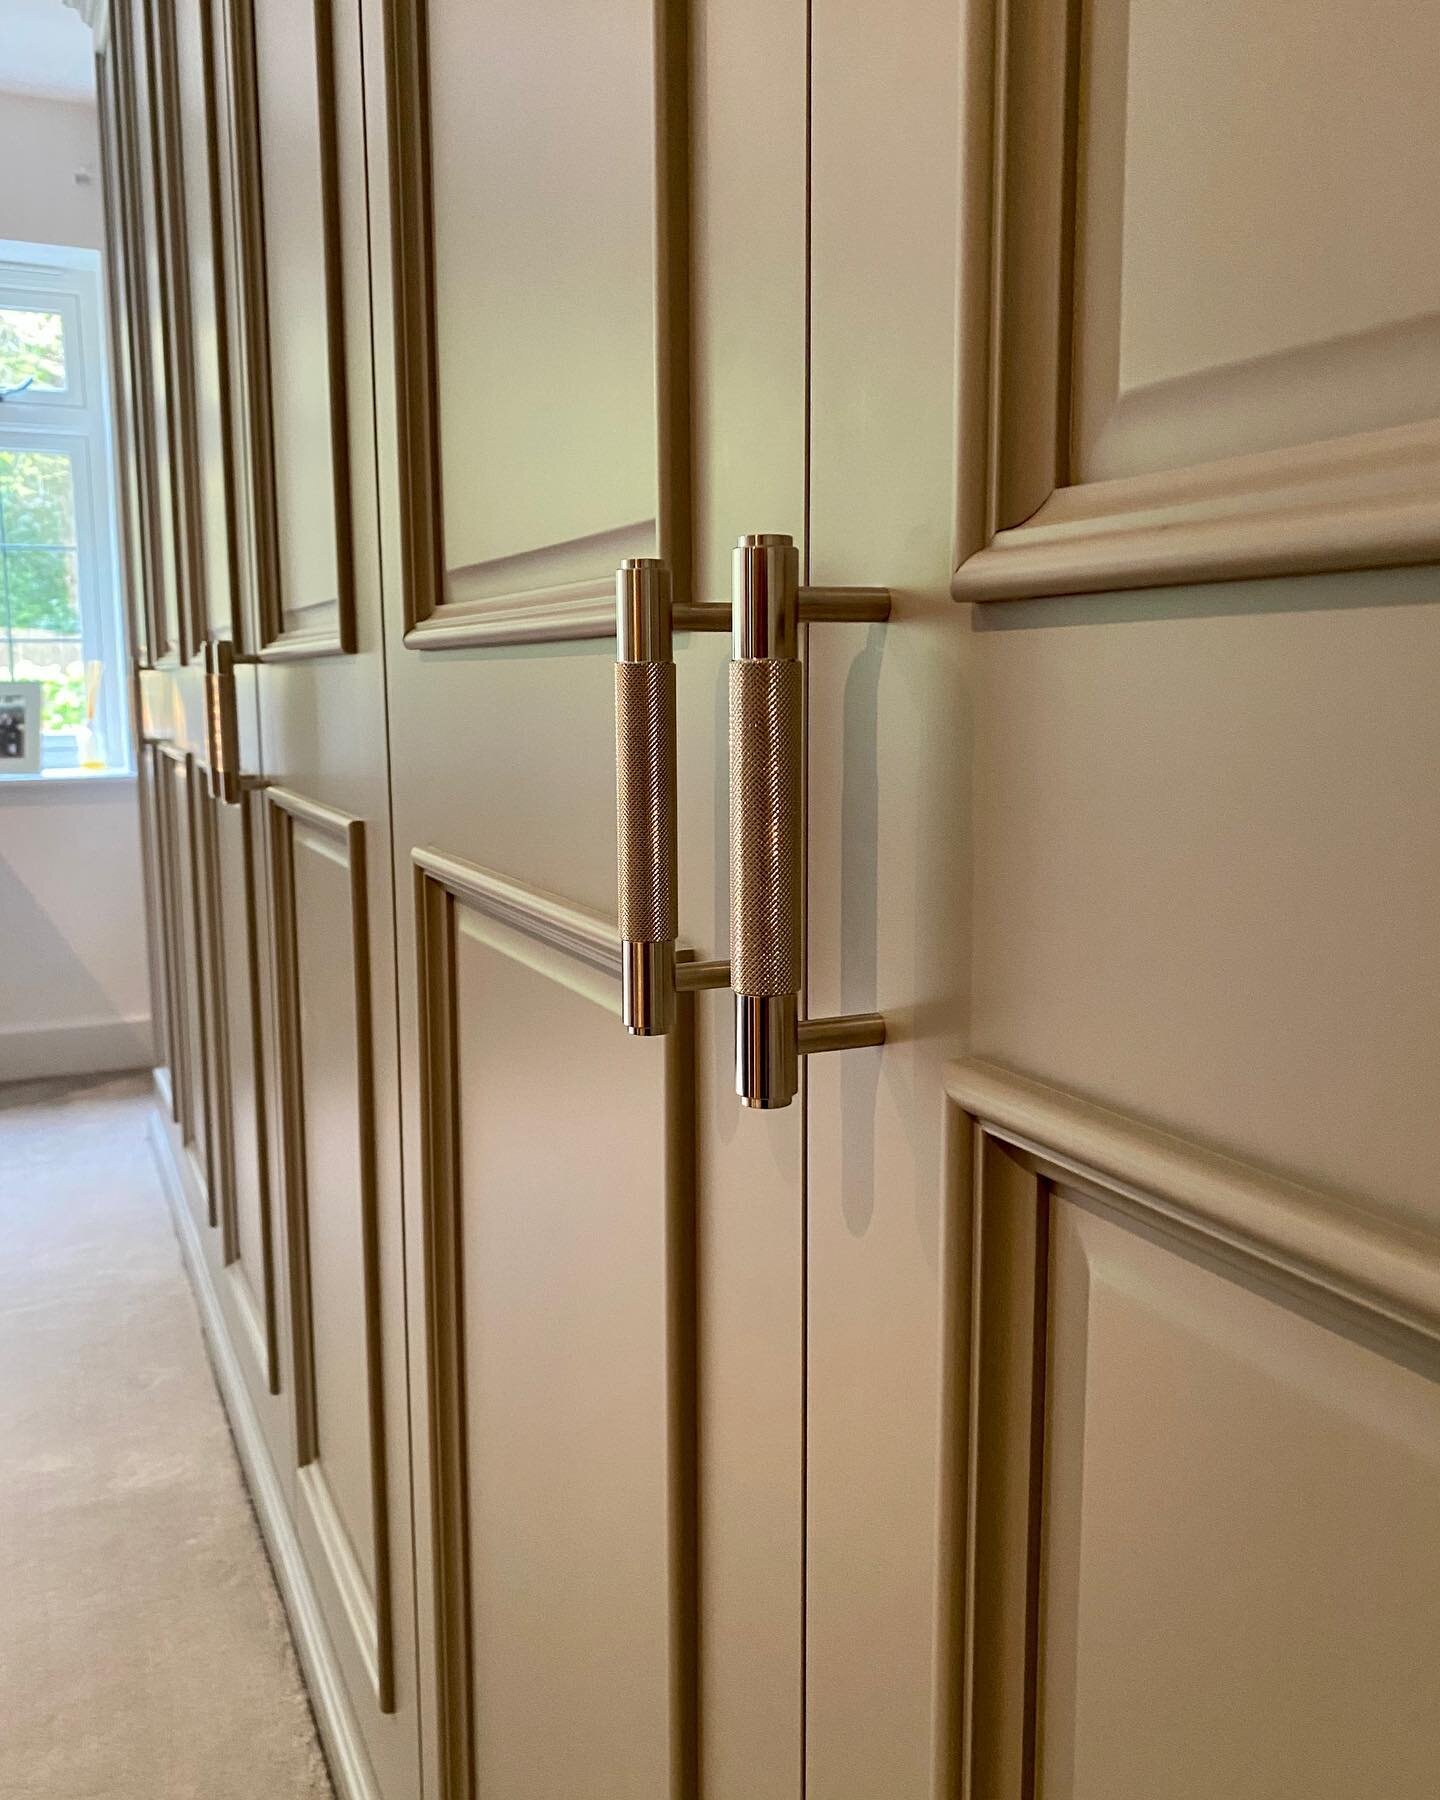 Our wardrobes are made to measure and we can create something beautiful that compliments the style of your home. These elegant wardrobe doors were finished in a spray paint match for Farrow &amp; Ball Lamp Room Gray. 
.
.
.
#bespokewardrobe #bedroomf